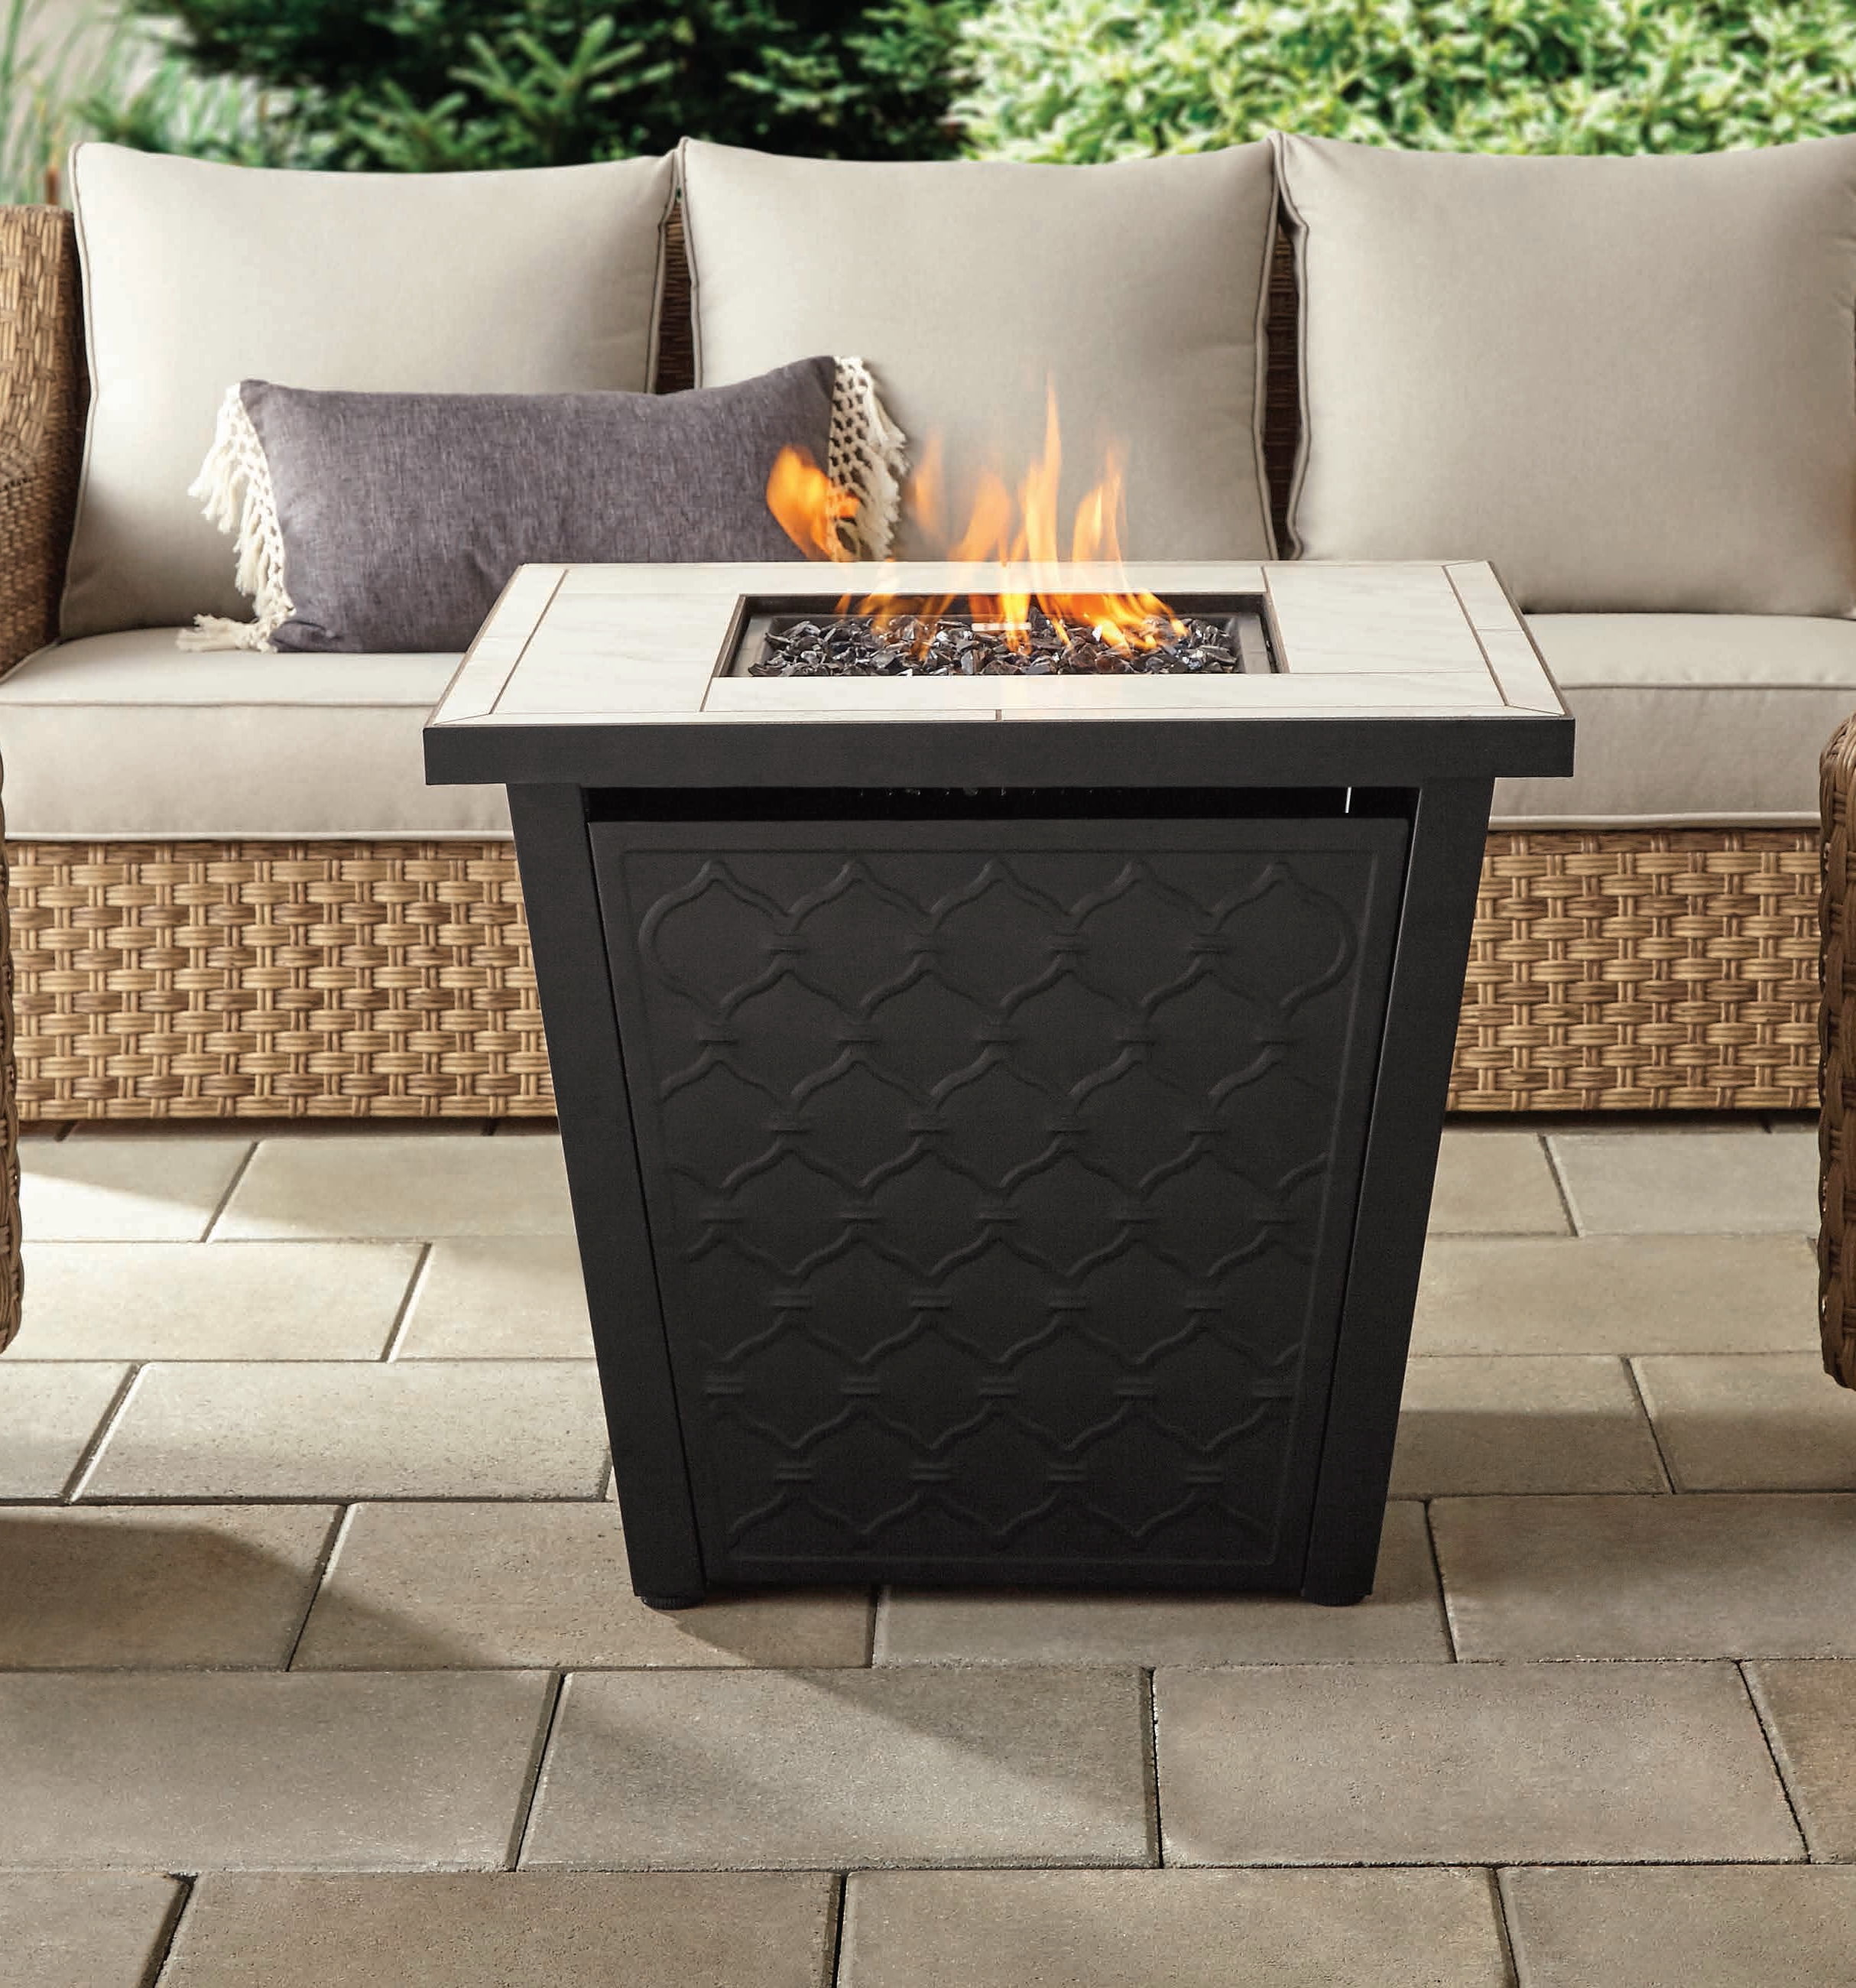 Belham Living Wadeview 31 in. Gas Square Wicker Fire Pit Table - Walmart.com